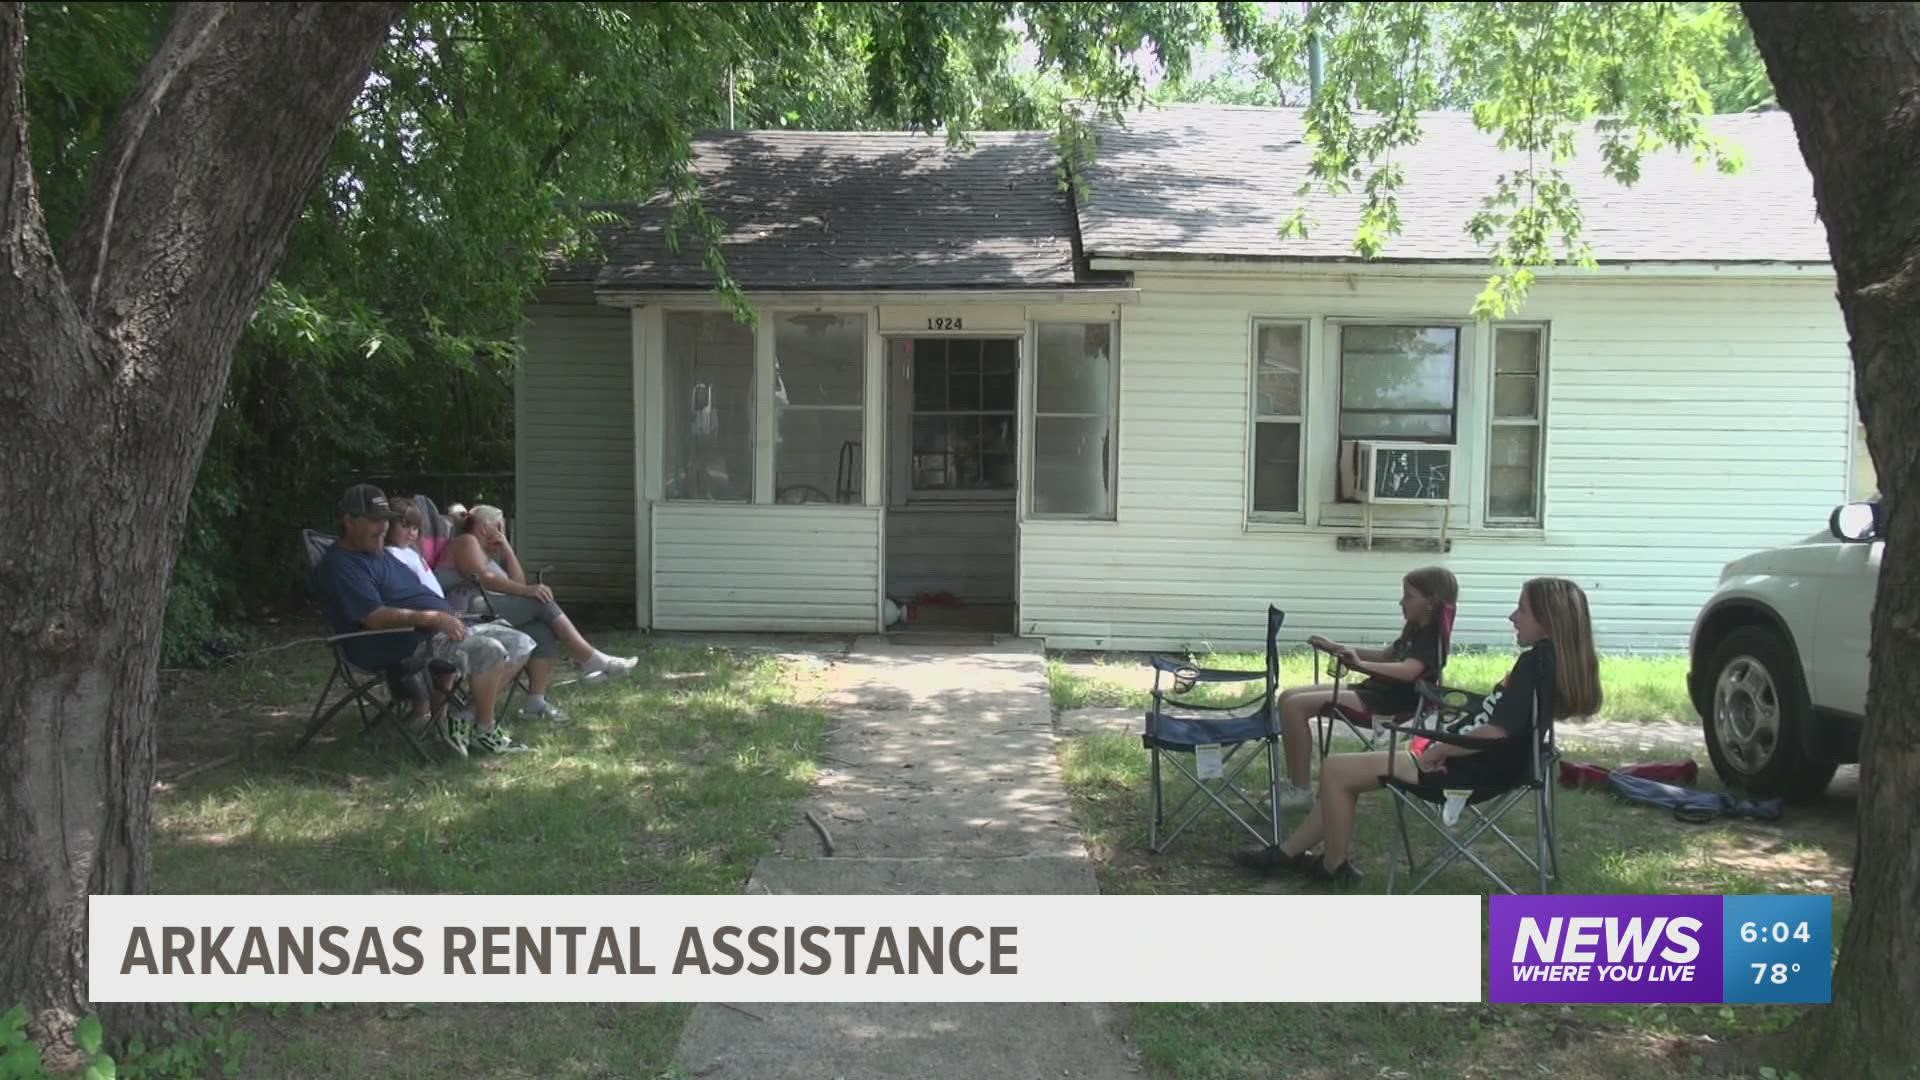 Arkansas residents struggling through the pandemic are asking for help from the $173 million in rental assistance.